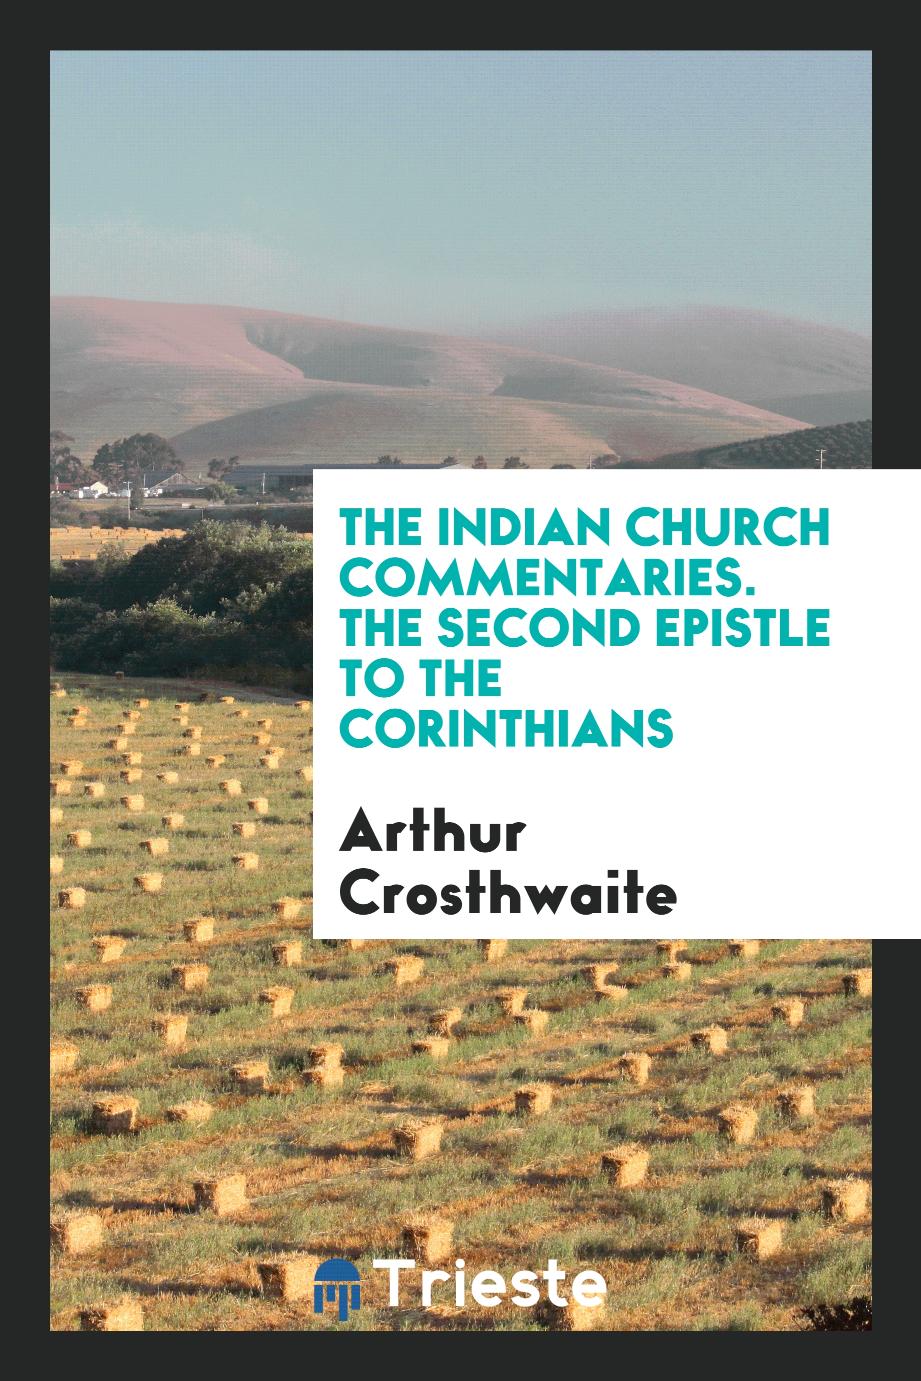 The Indian Church Commentaries. The Second epistle to the Corinthians